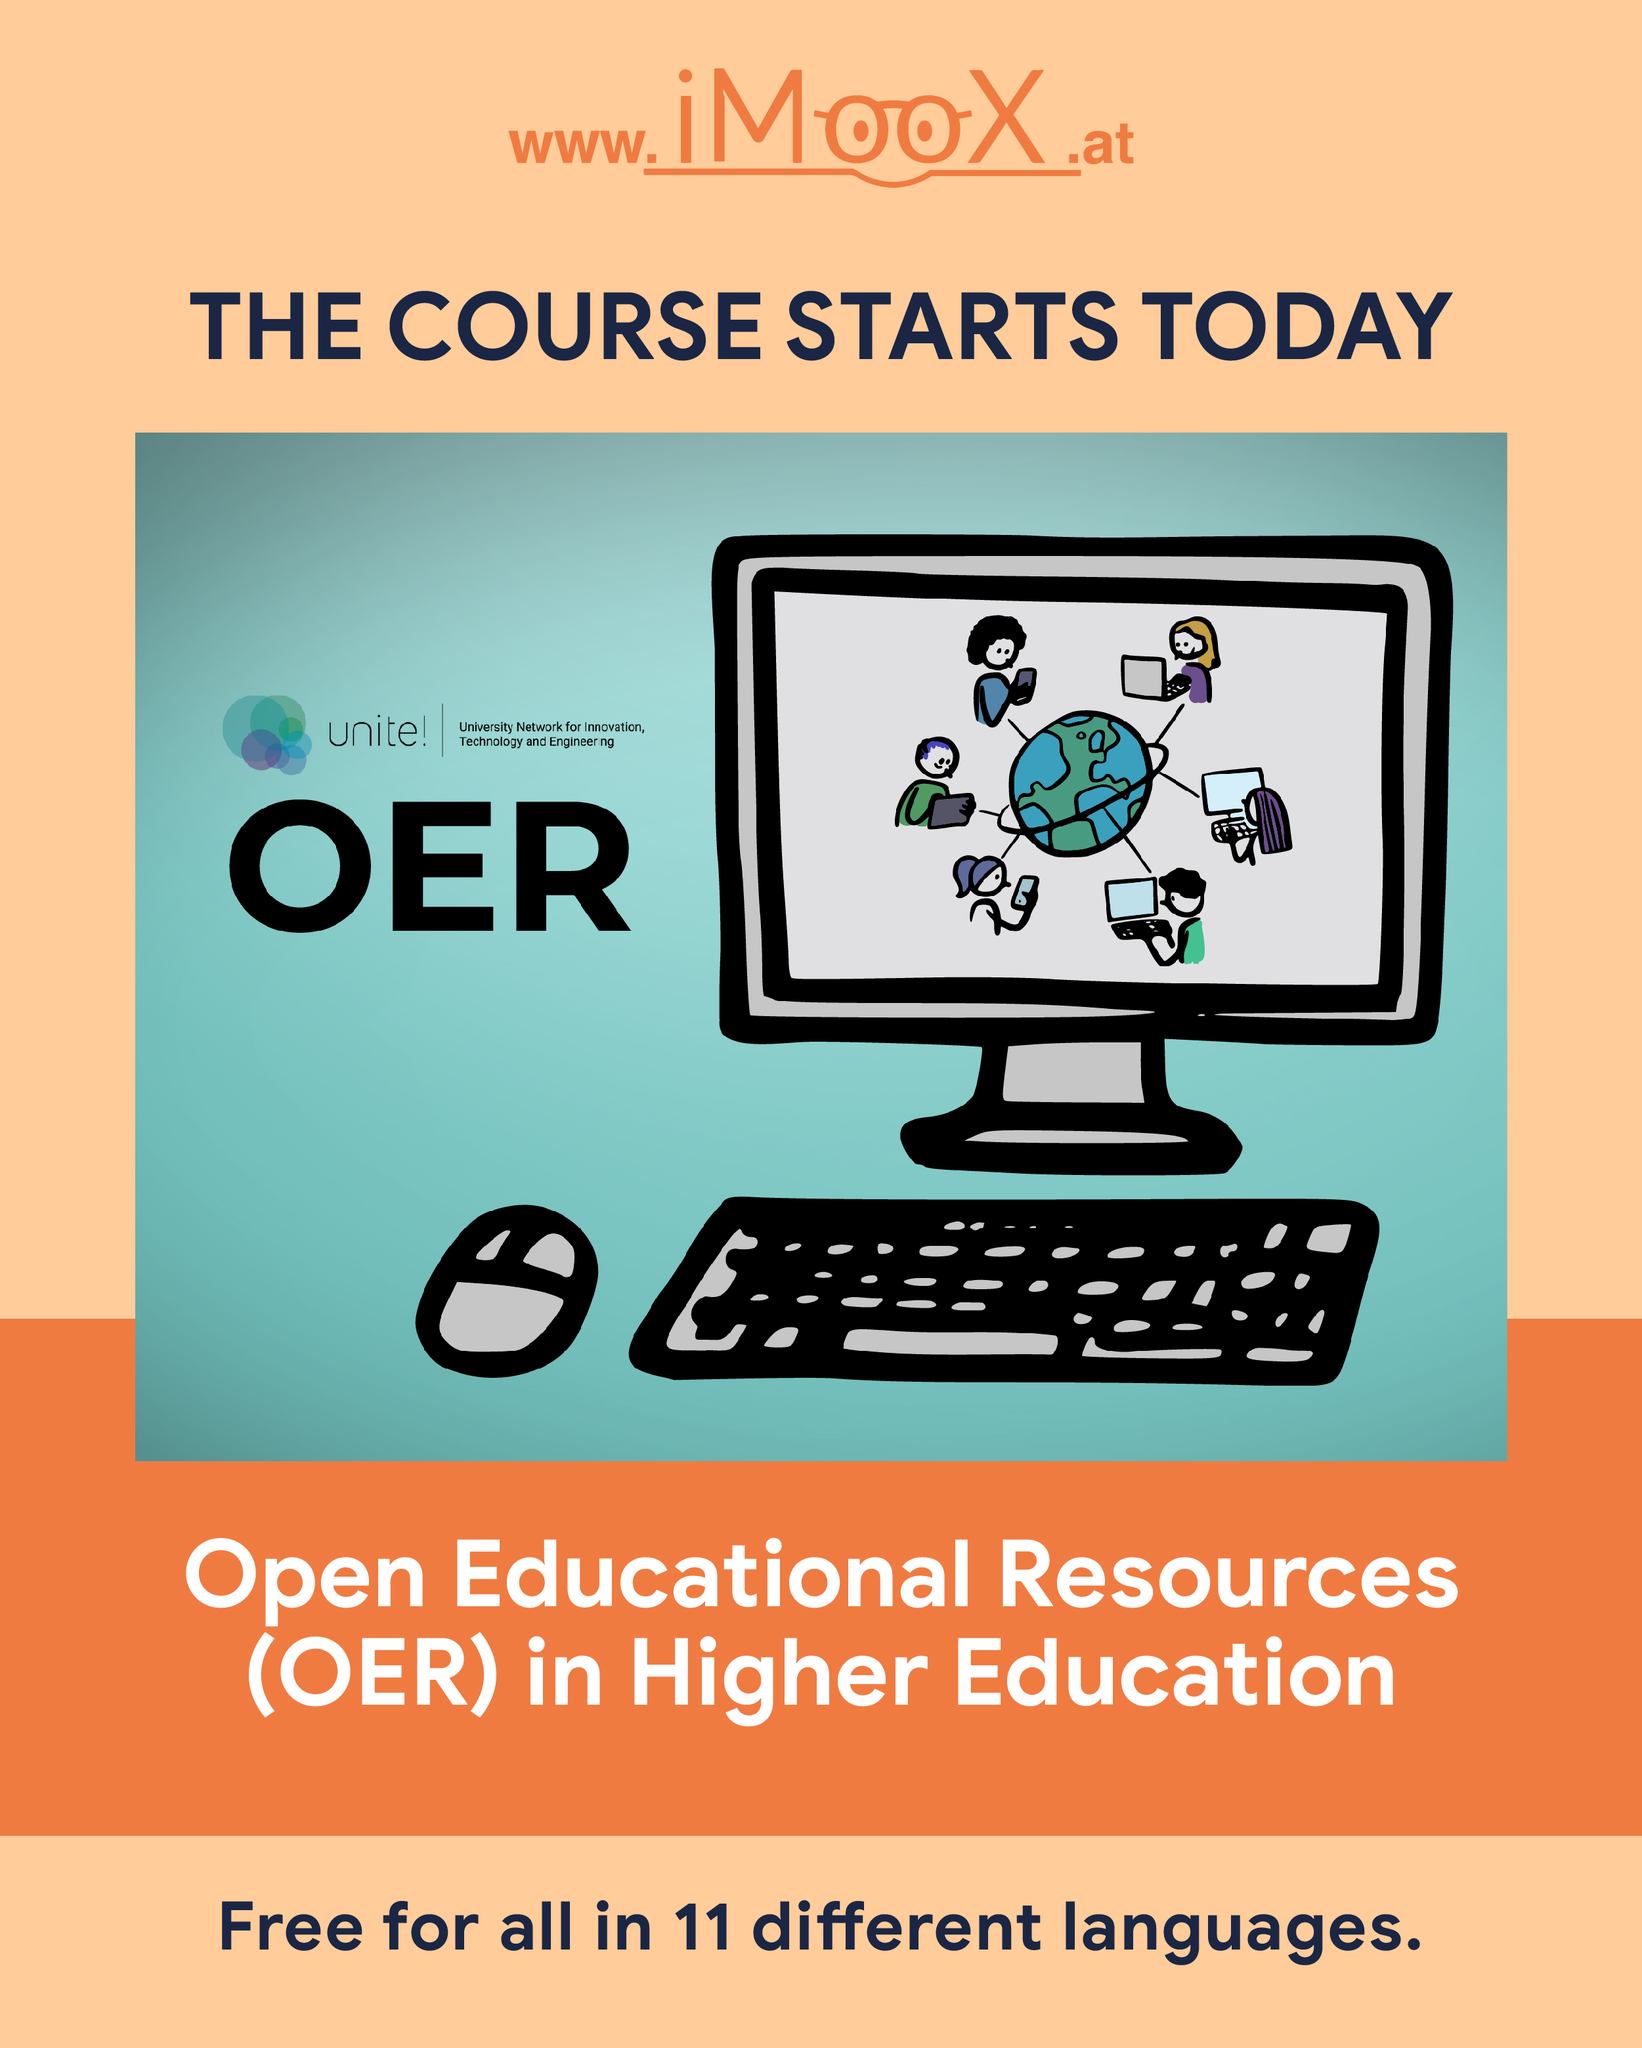 Today is THE day! 🎉 Our online course "Open Educational Resources (OER) in Higher Education" has ...